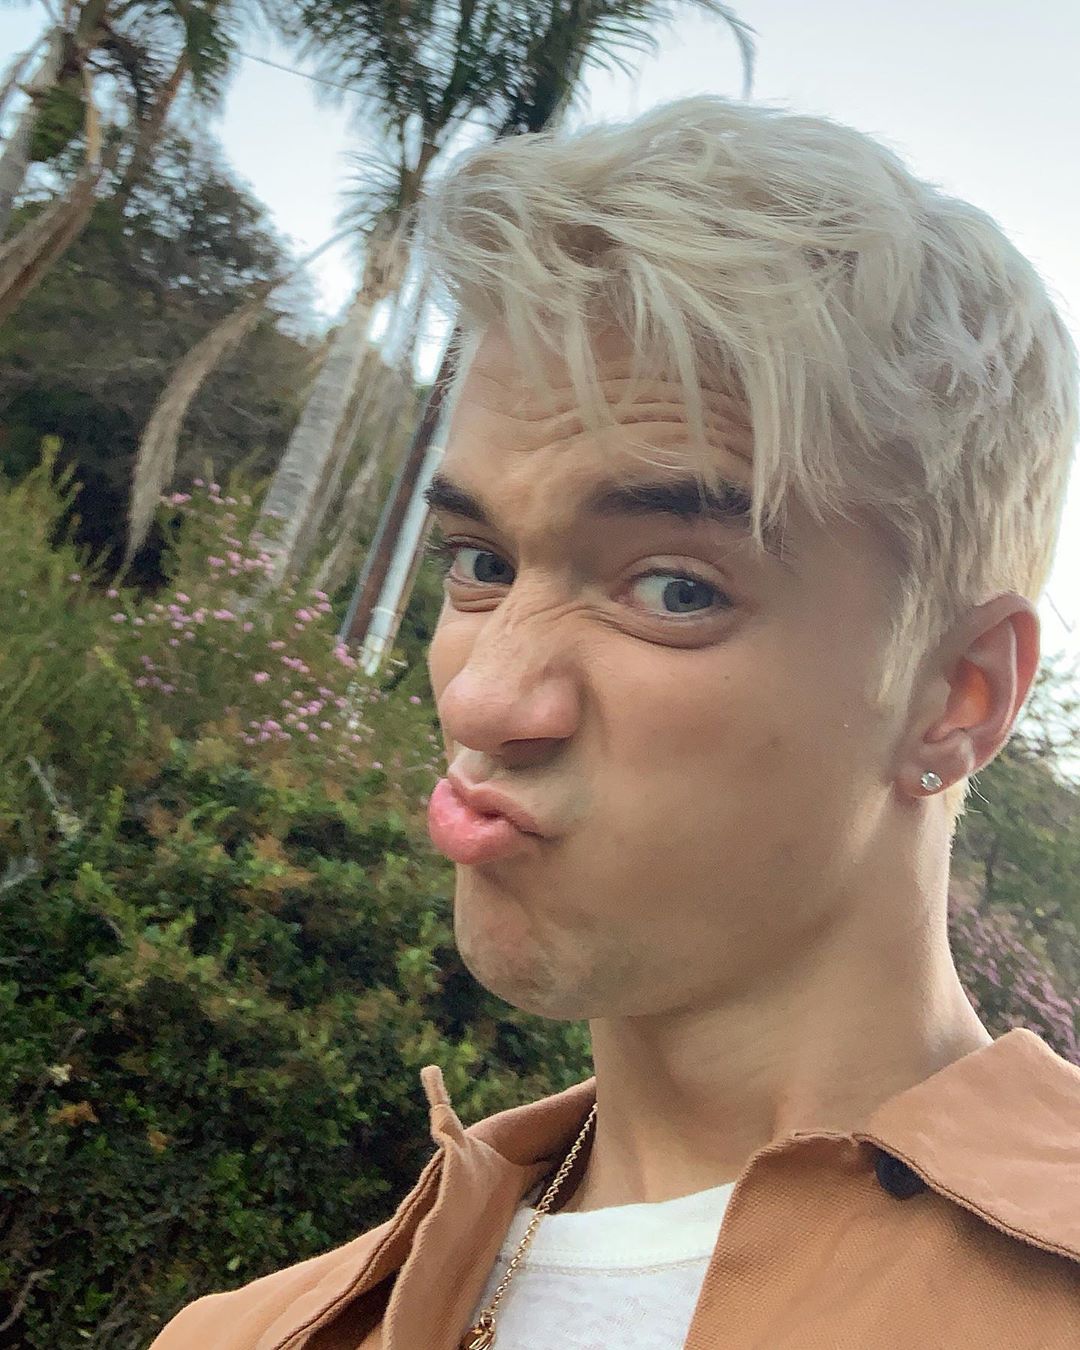 Daniel Seavey, Why Don't We Member, Makes  a Funny Face